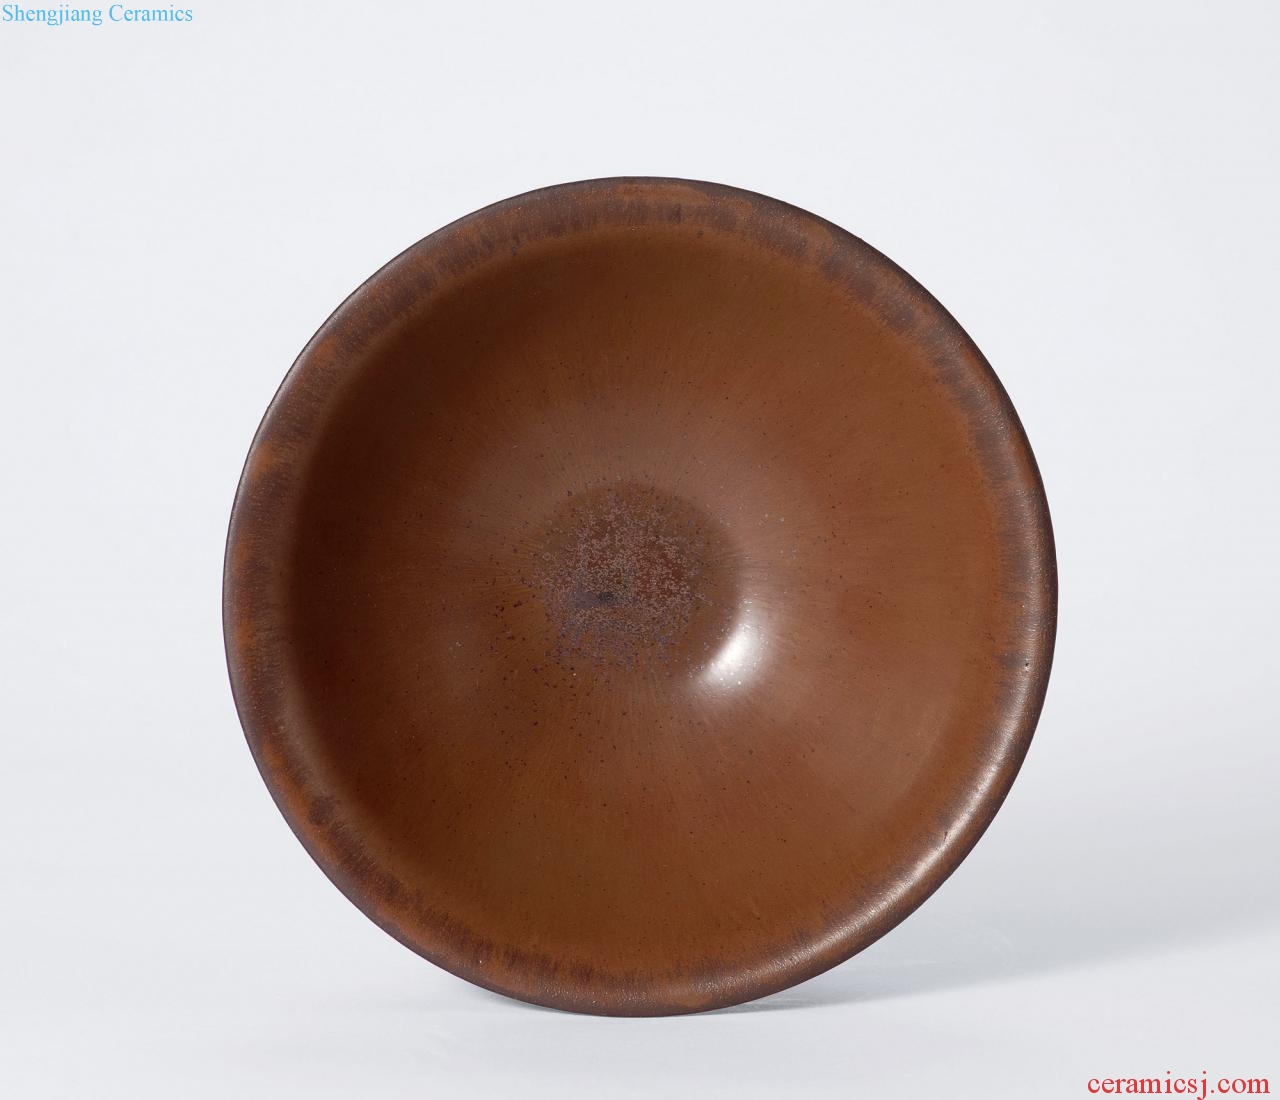 The southern song dynasty (1127-1279) to build kilns sauce glaze bowls